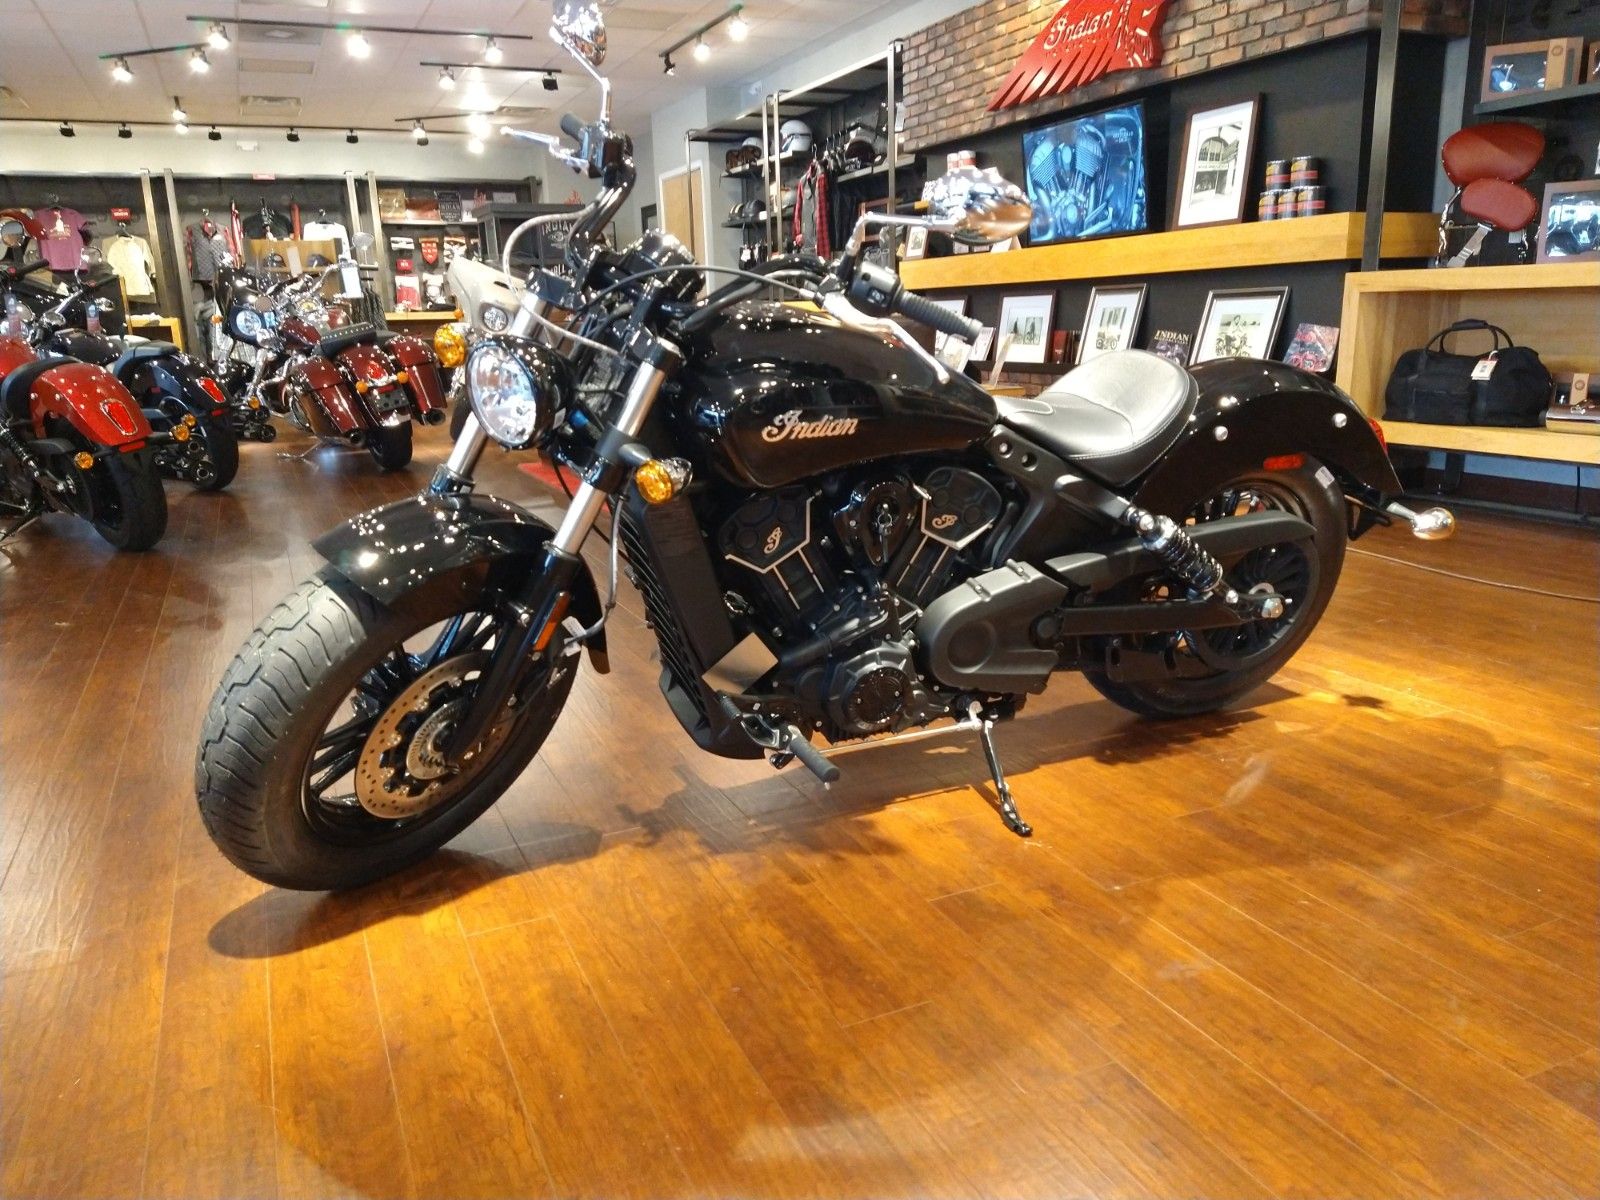 2021 Indian Scout® Sixty ABS in Fredericksburg, Virginia - Photo 2